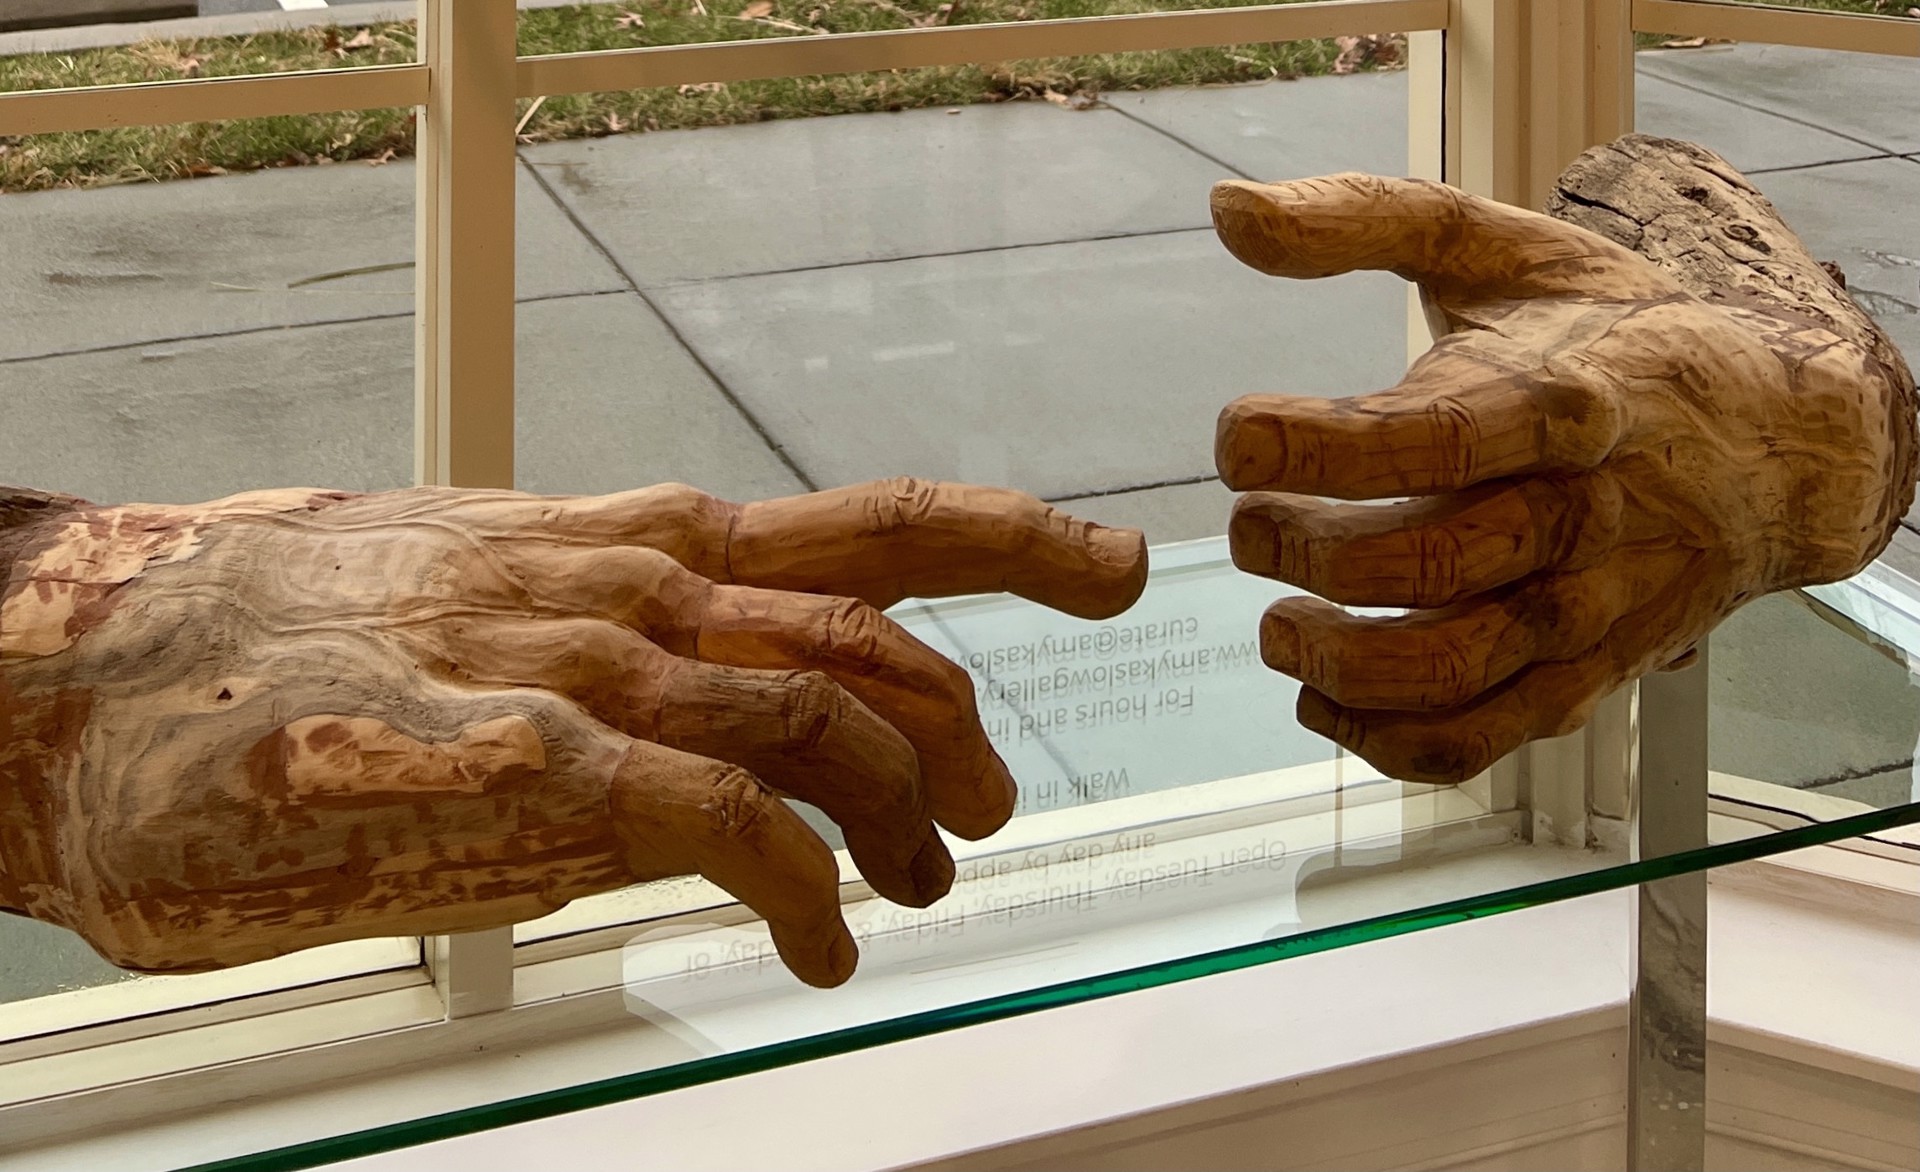 Carved Wooden Hands by Mario Padilla